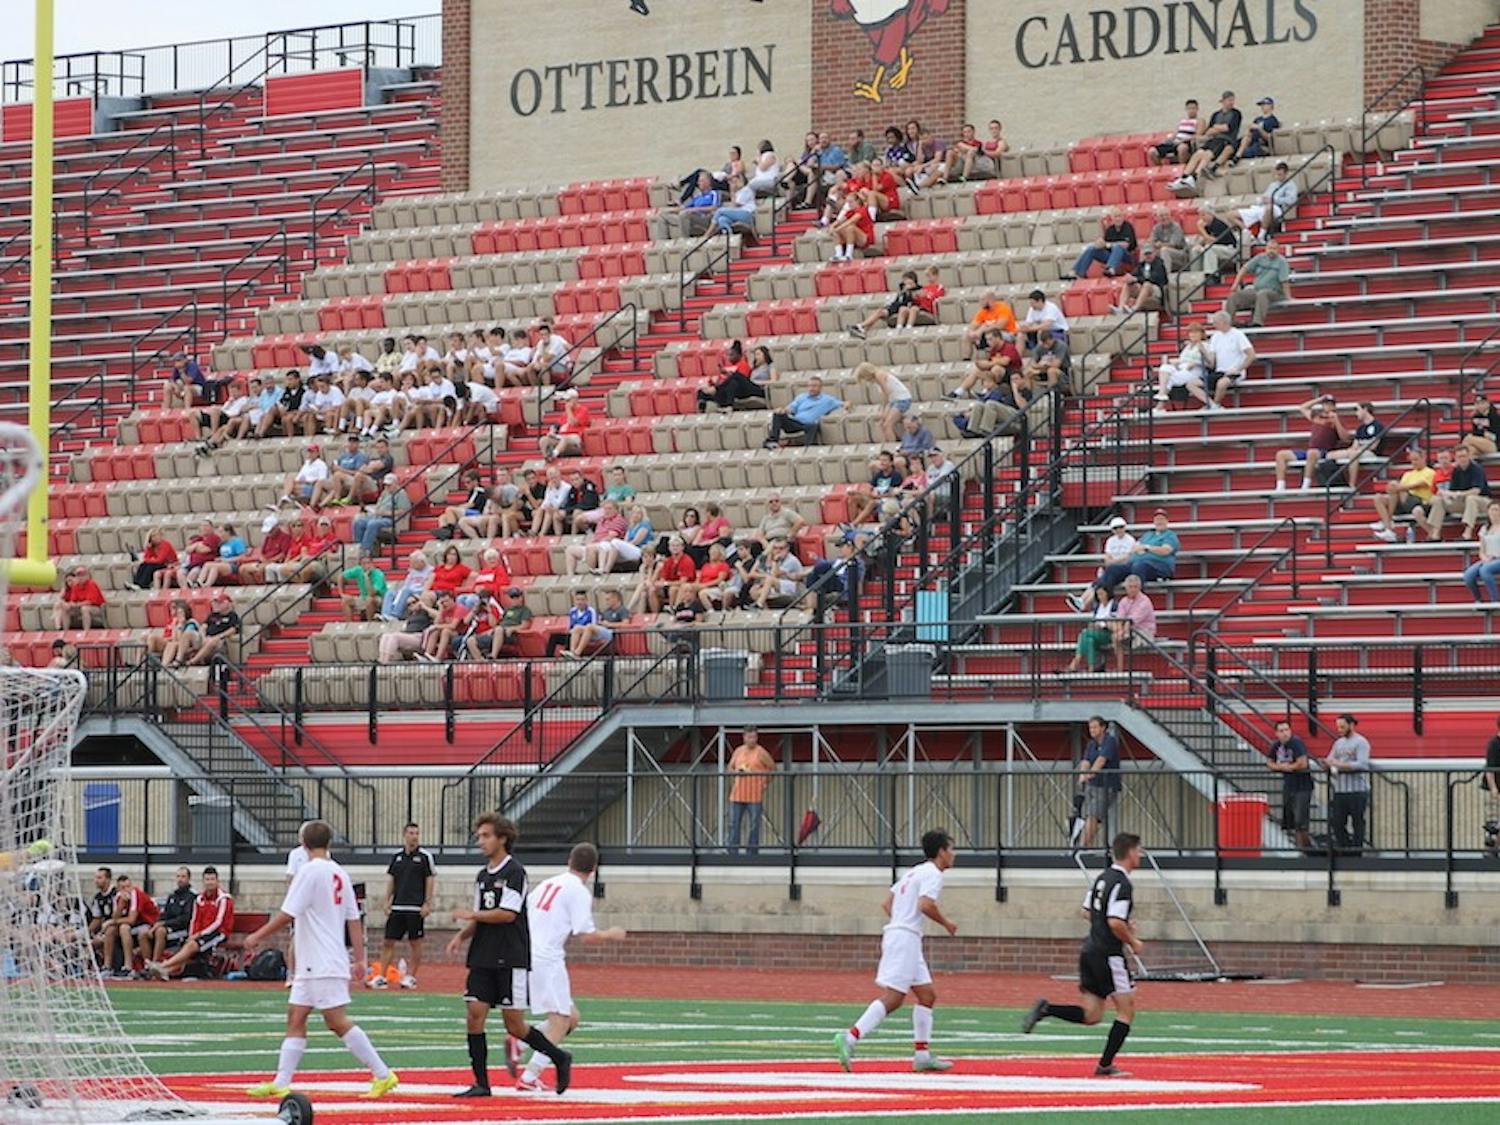 Nearly empty stands at the men's soccer game between Otterbein and Ohio Wesleyan. 